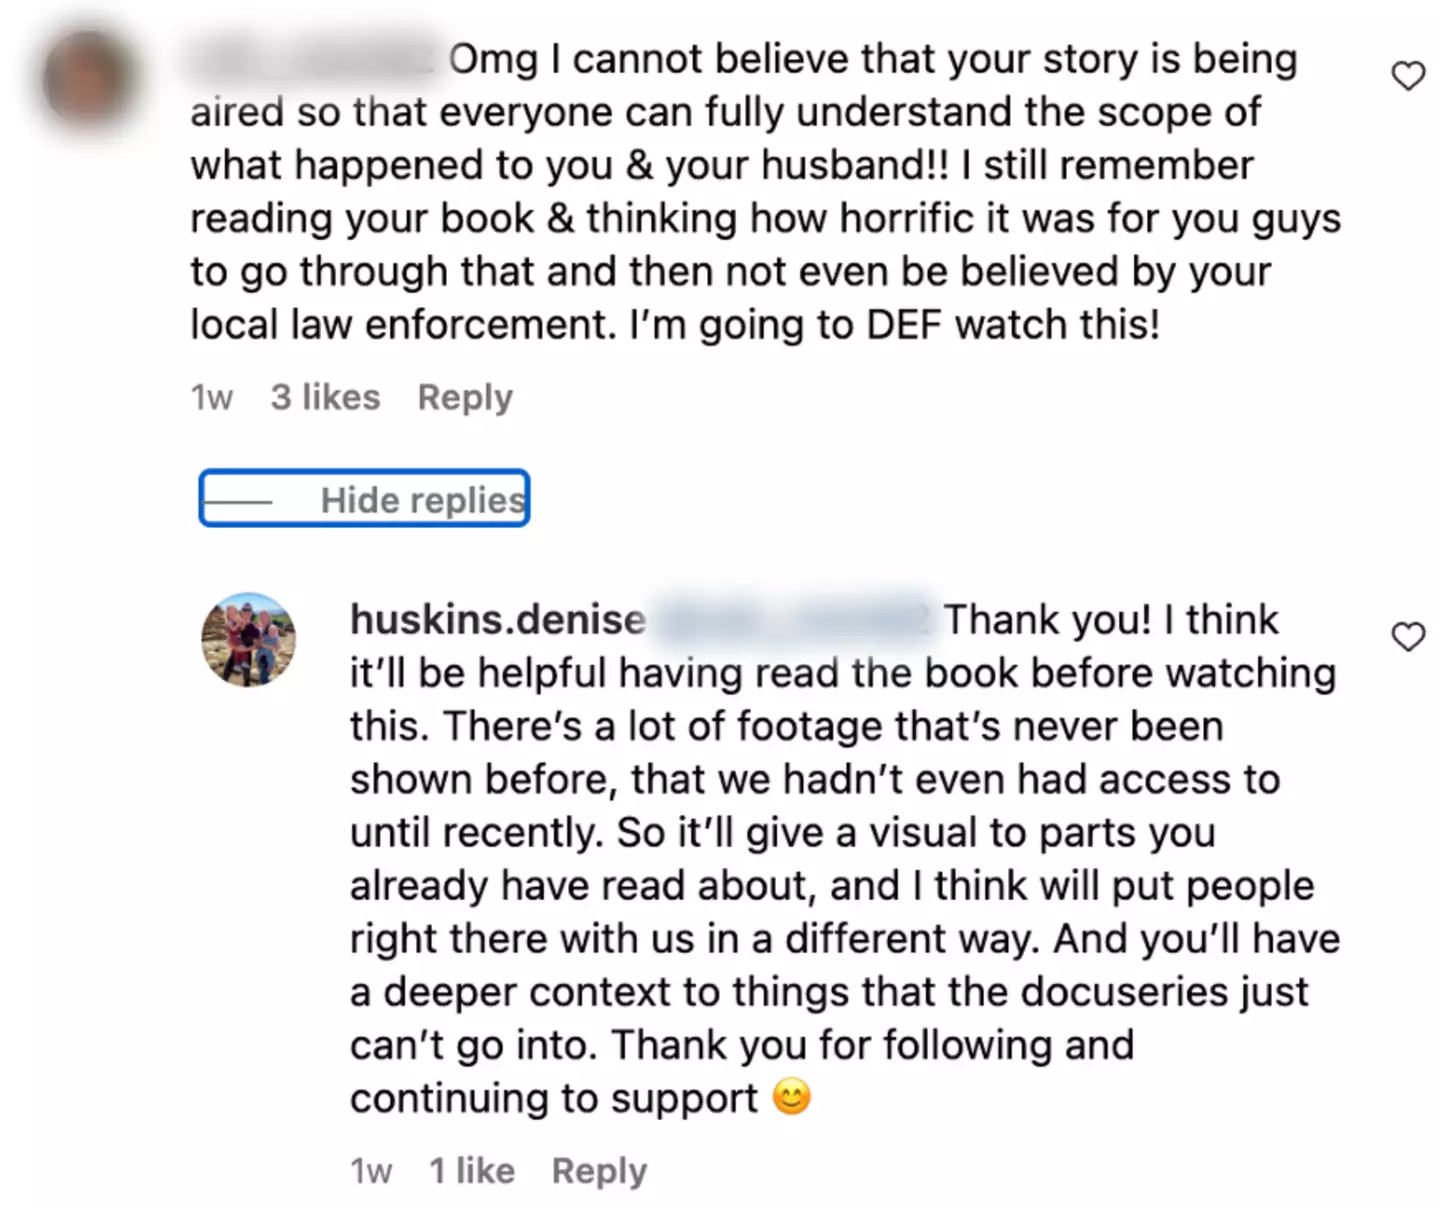 Denise responded to a user, urging other viewers to read the book first.